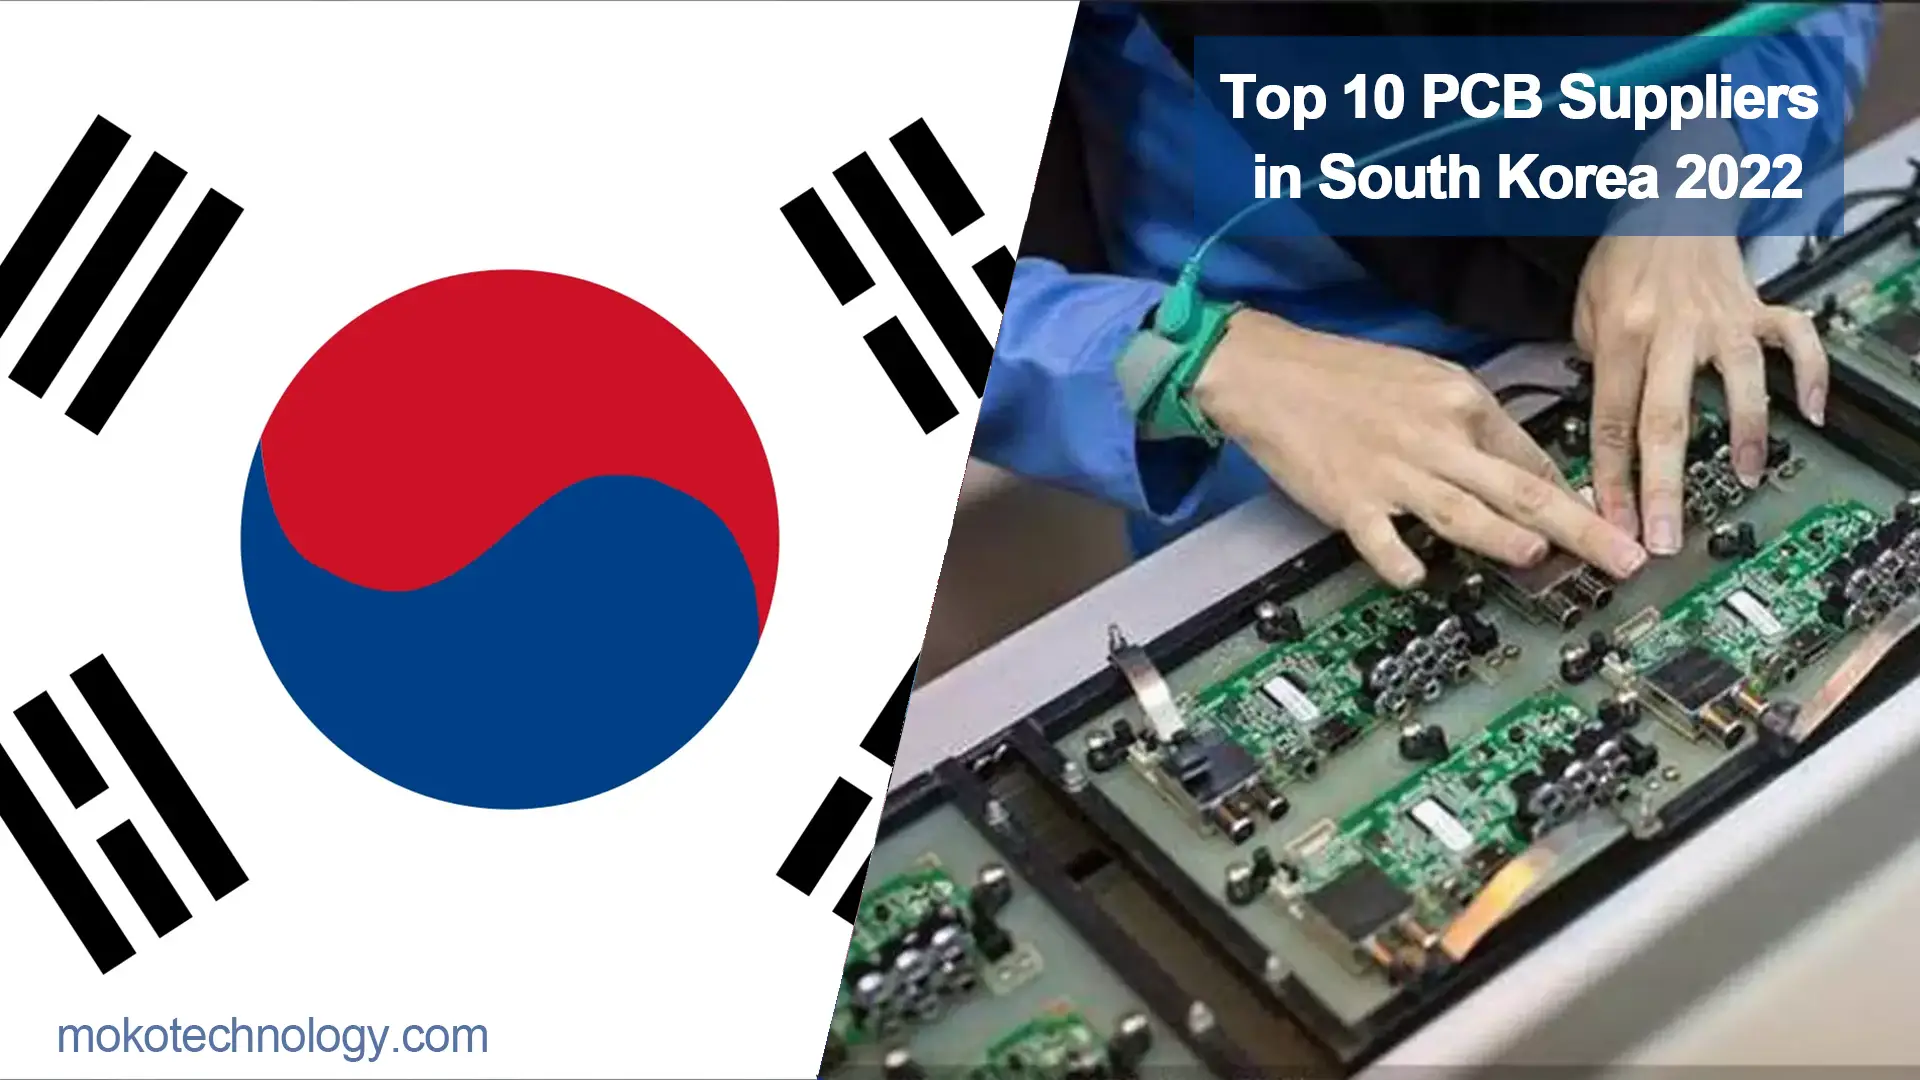 Üles 10 PCB Suppliers in South Korea 2022